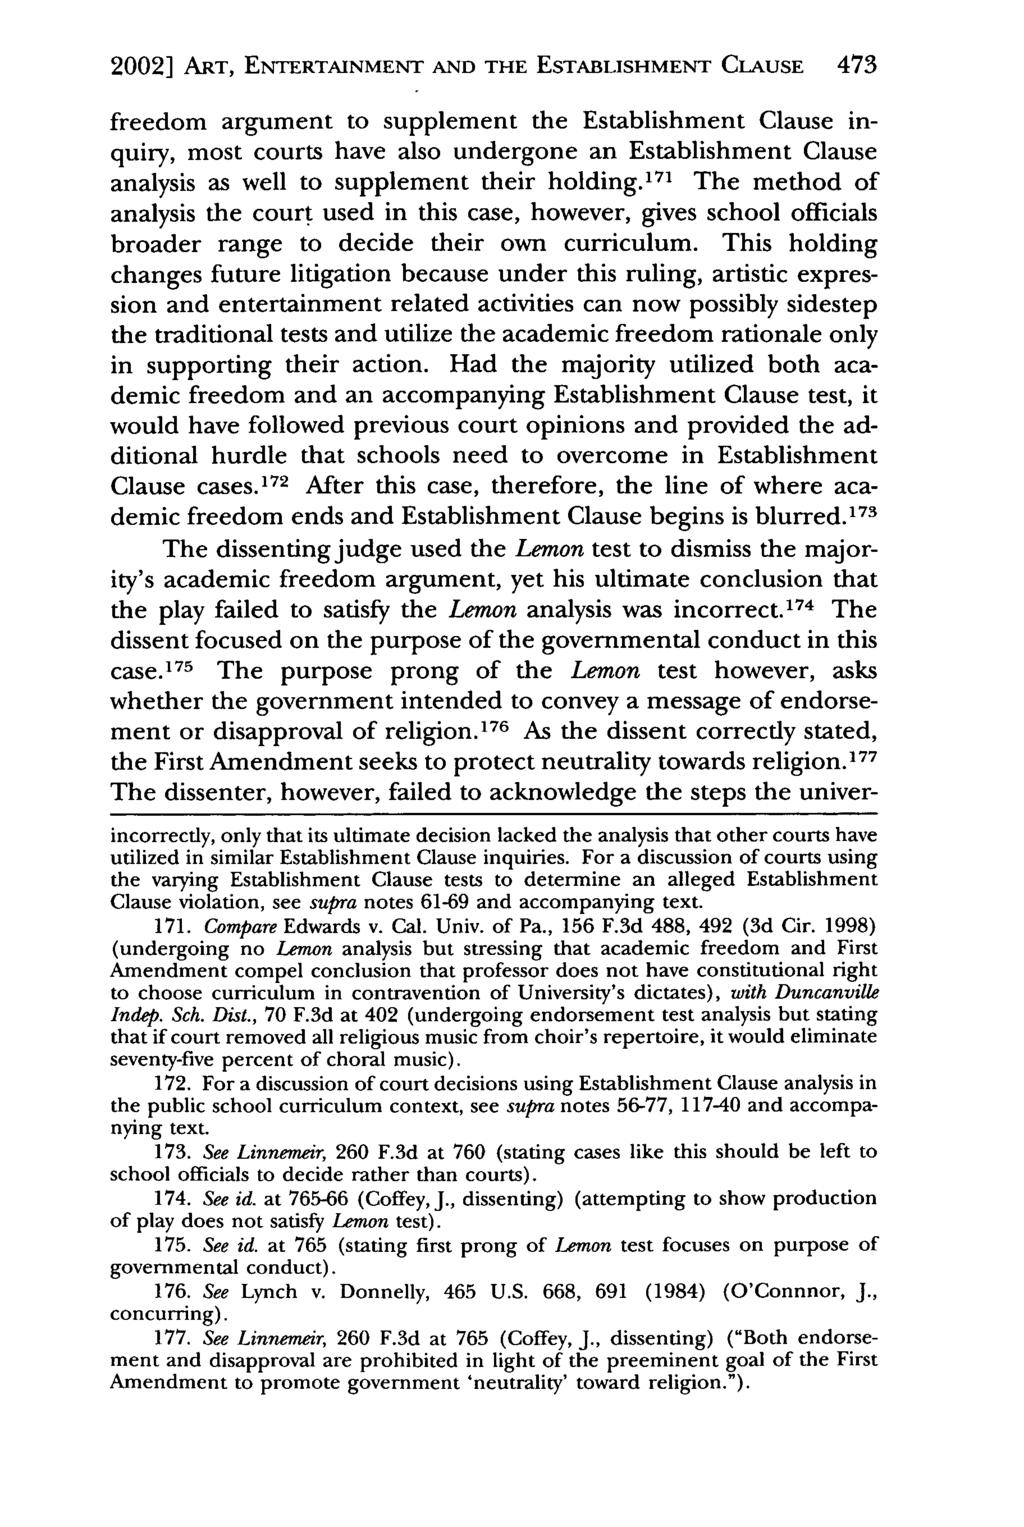 2002] Whelan: The Show Must Go on as Academic ART, ENTERTAINMENT AND THE ESTABLISHMENT Freedom Saves the Day: CLAUSE But Where 473 freedom argument to supplement the Establishment Clause inquiry,